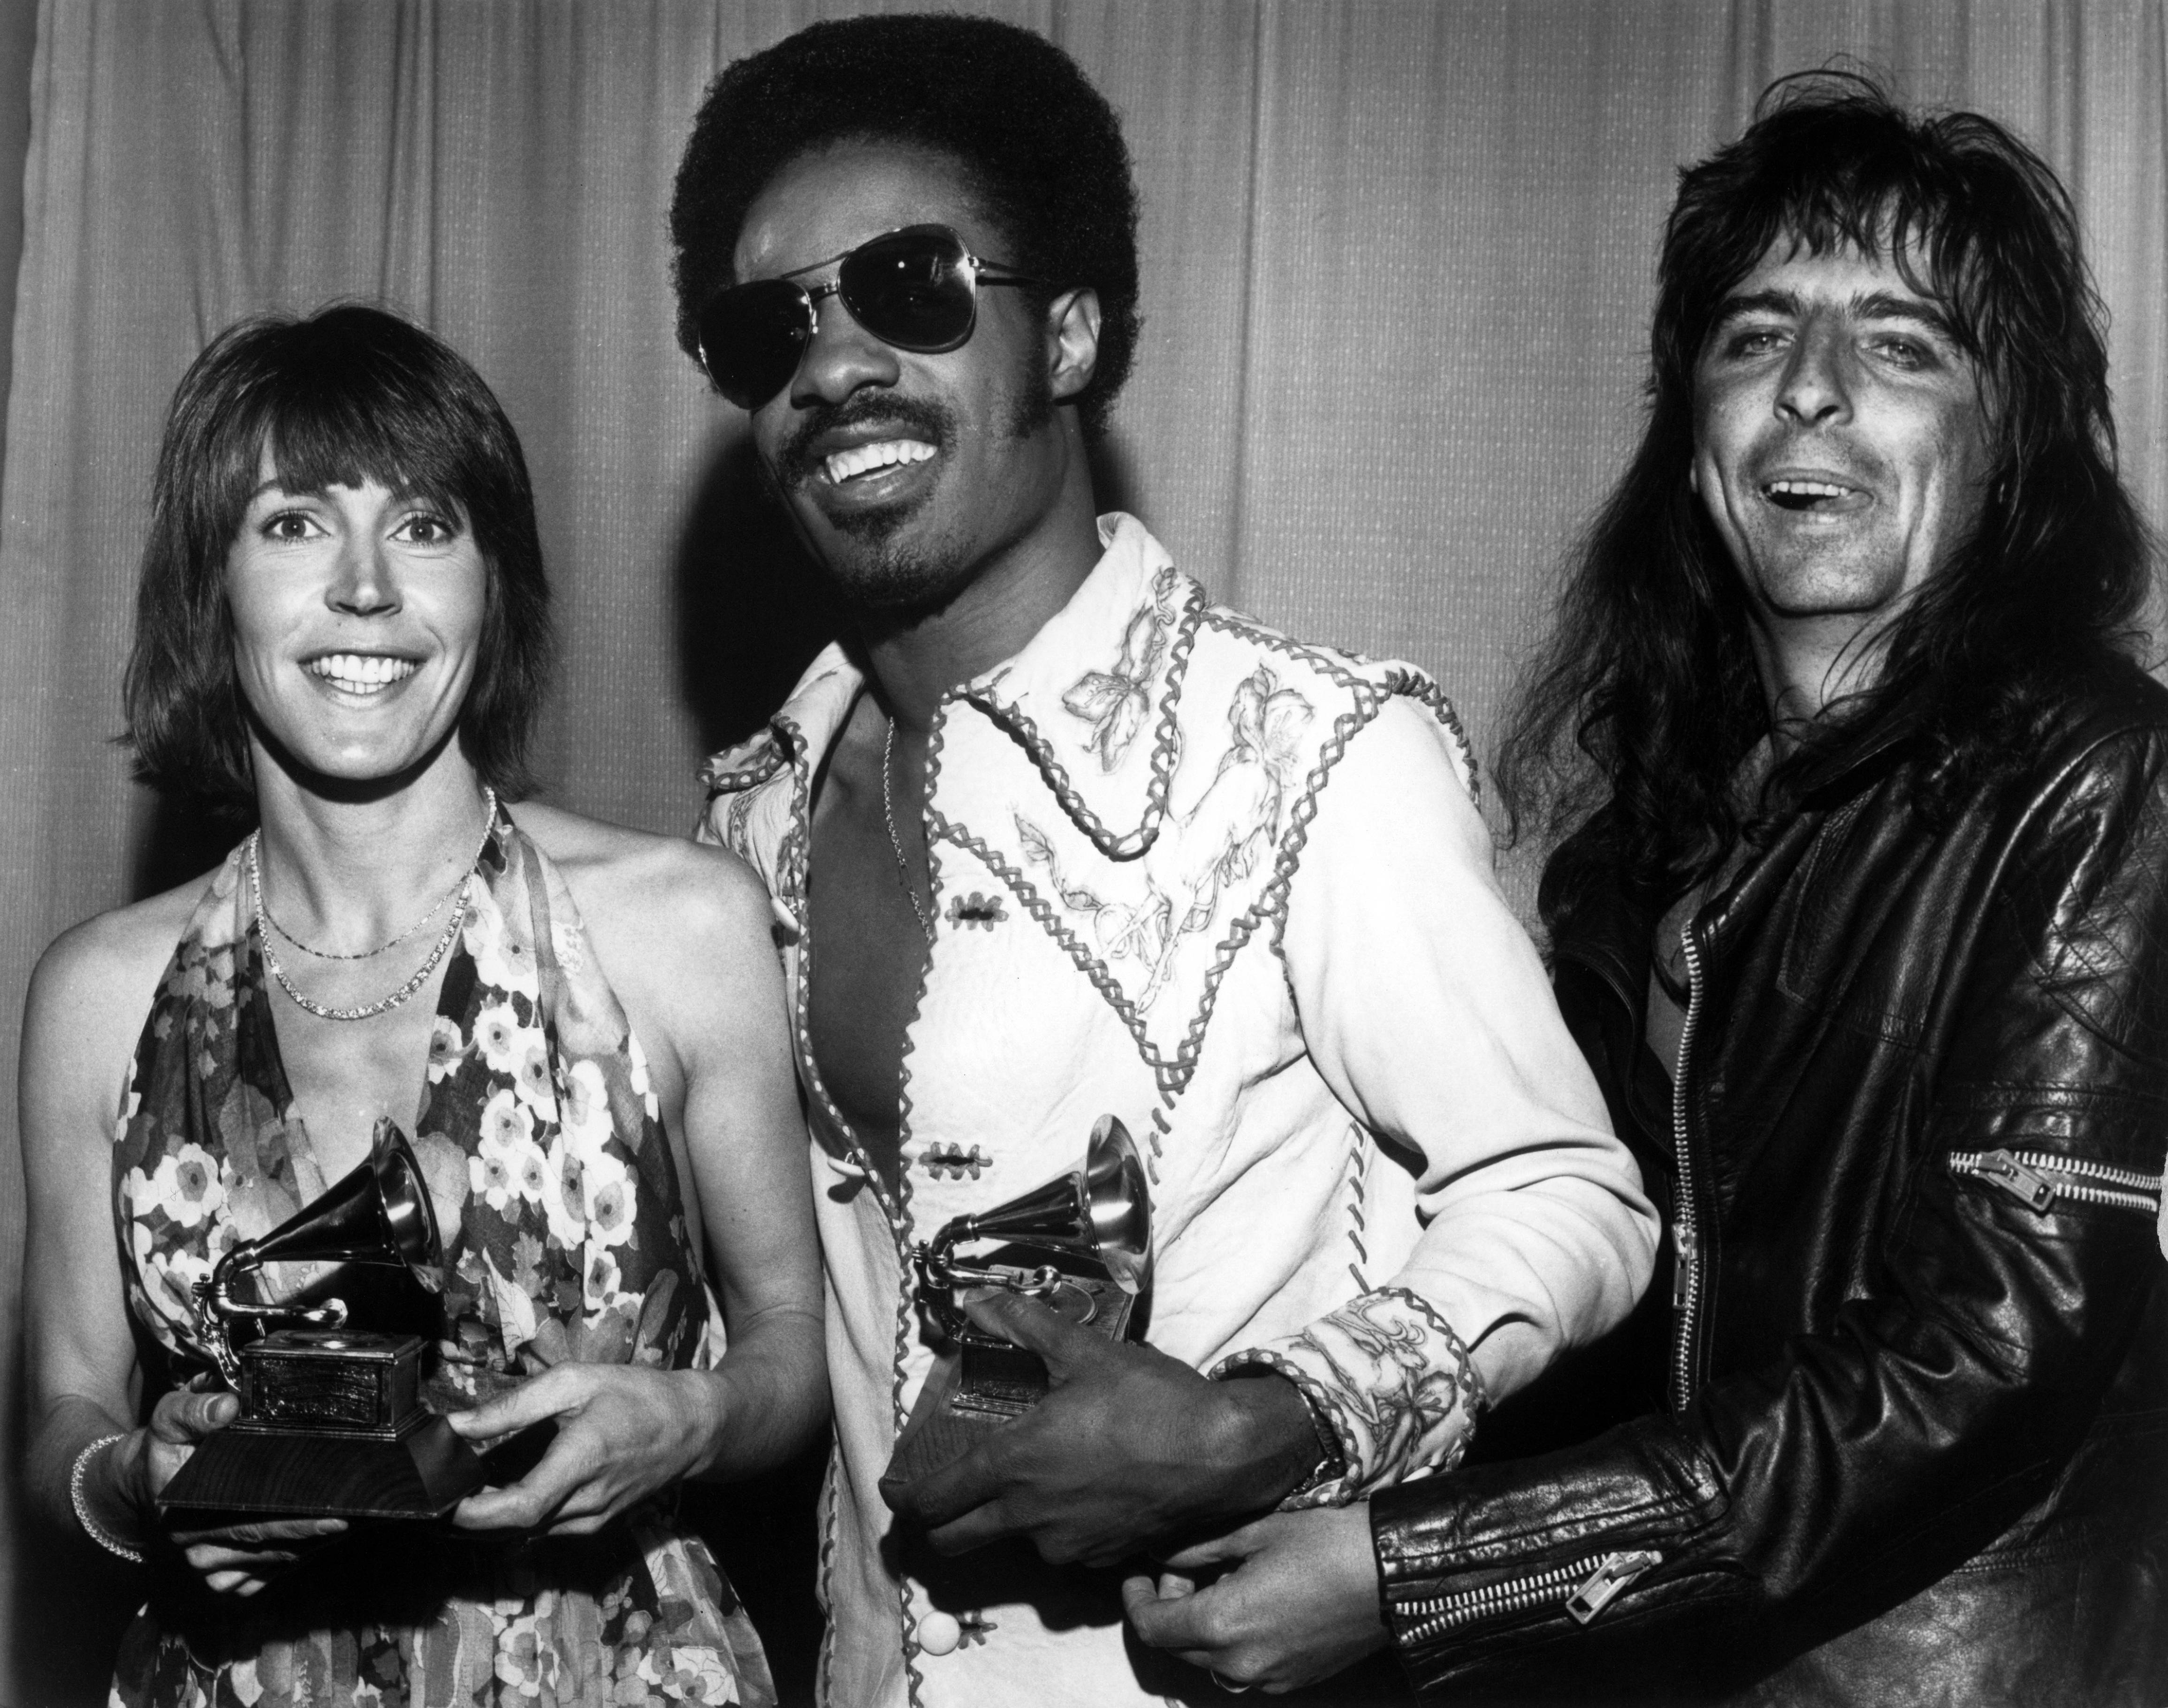 Helen Reddy in 1973 with her Grammy Award for her song 'I Am Woman'. She is pictured with Stevie Wonder and Alice Cooper.